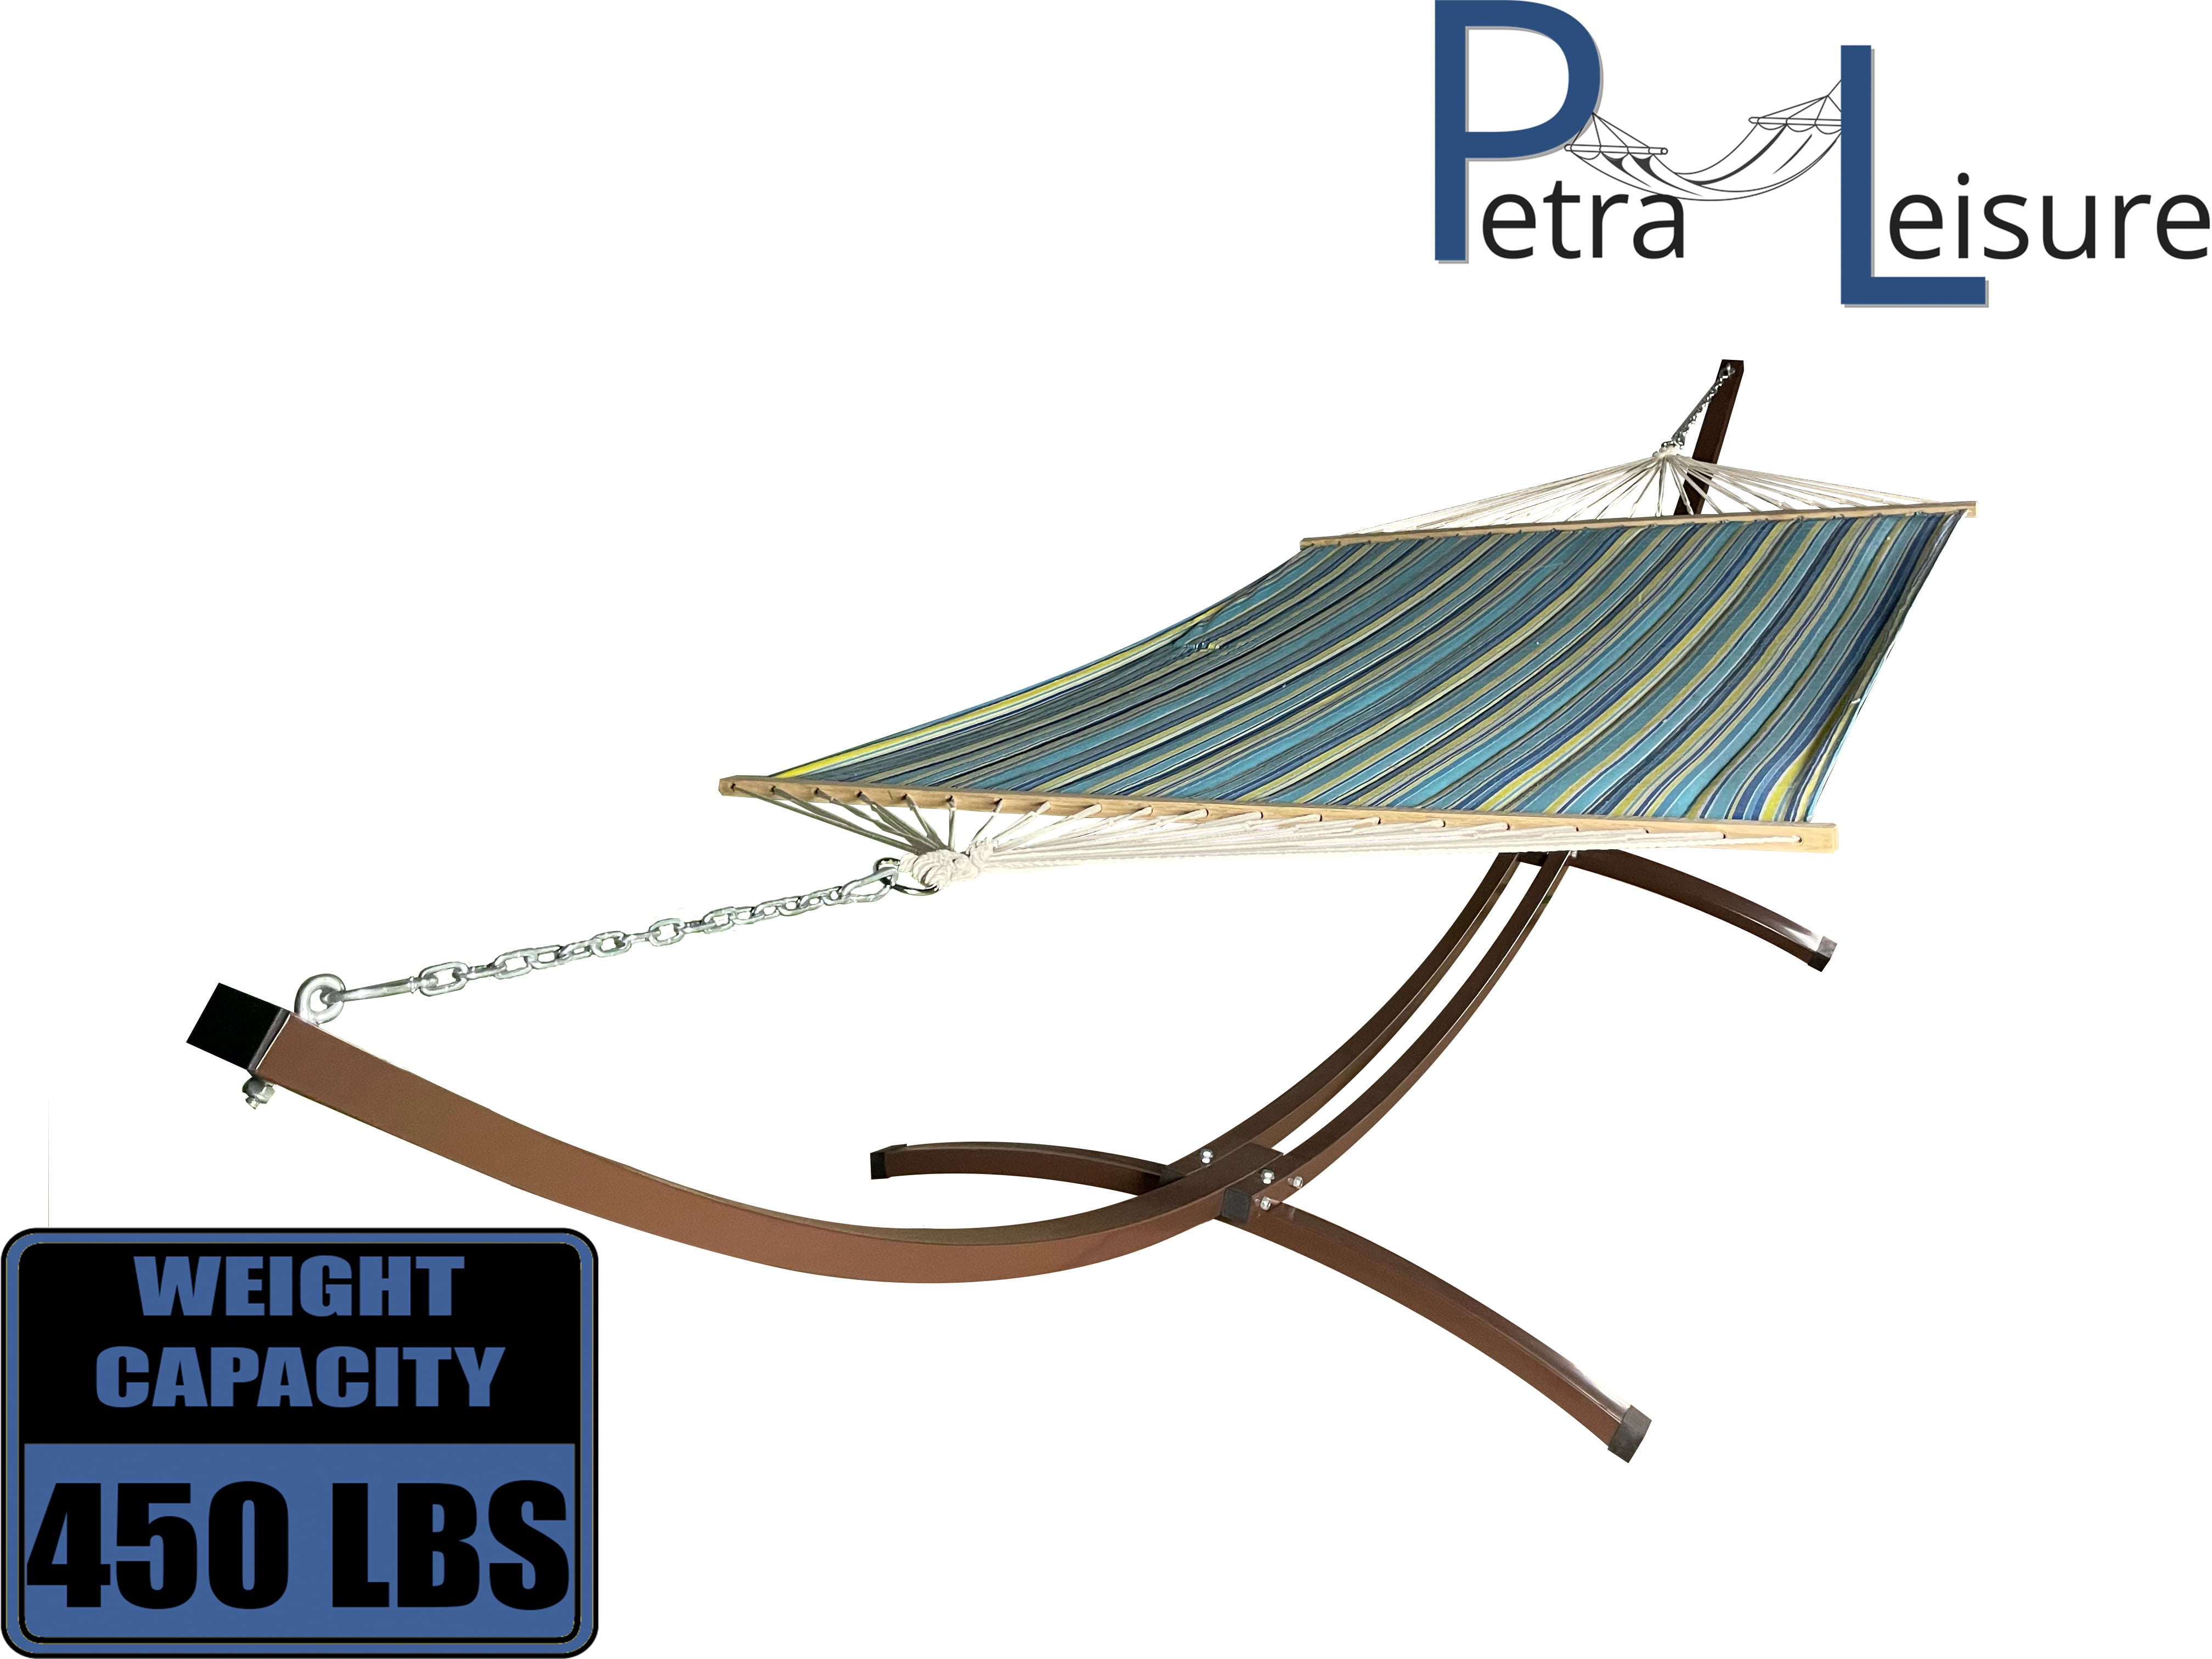 Details about   Petra Leisure Quilted Teal/Yellow TWO Person Hammock Bed STAND NOT INCLUDED 